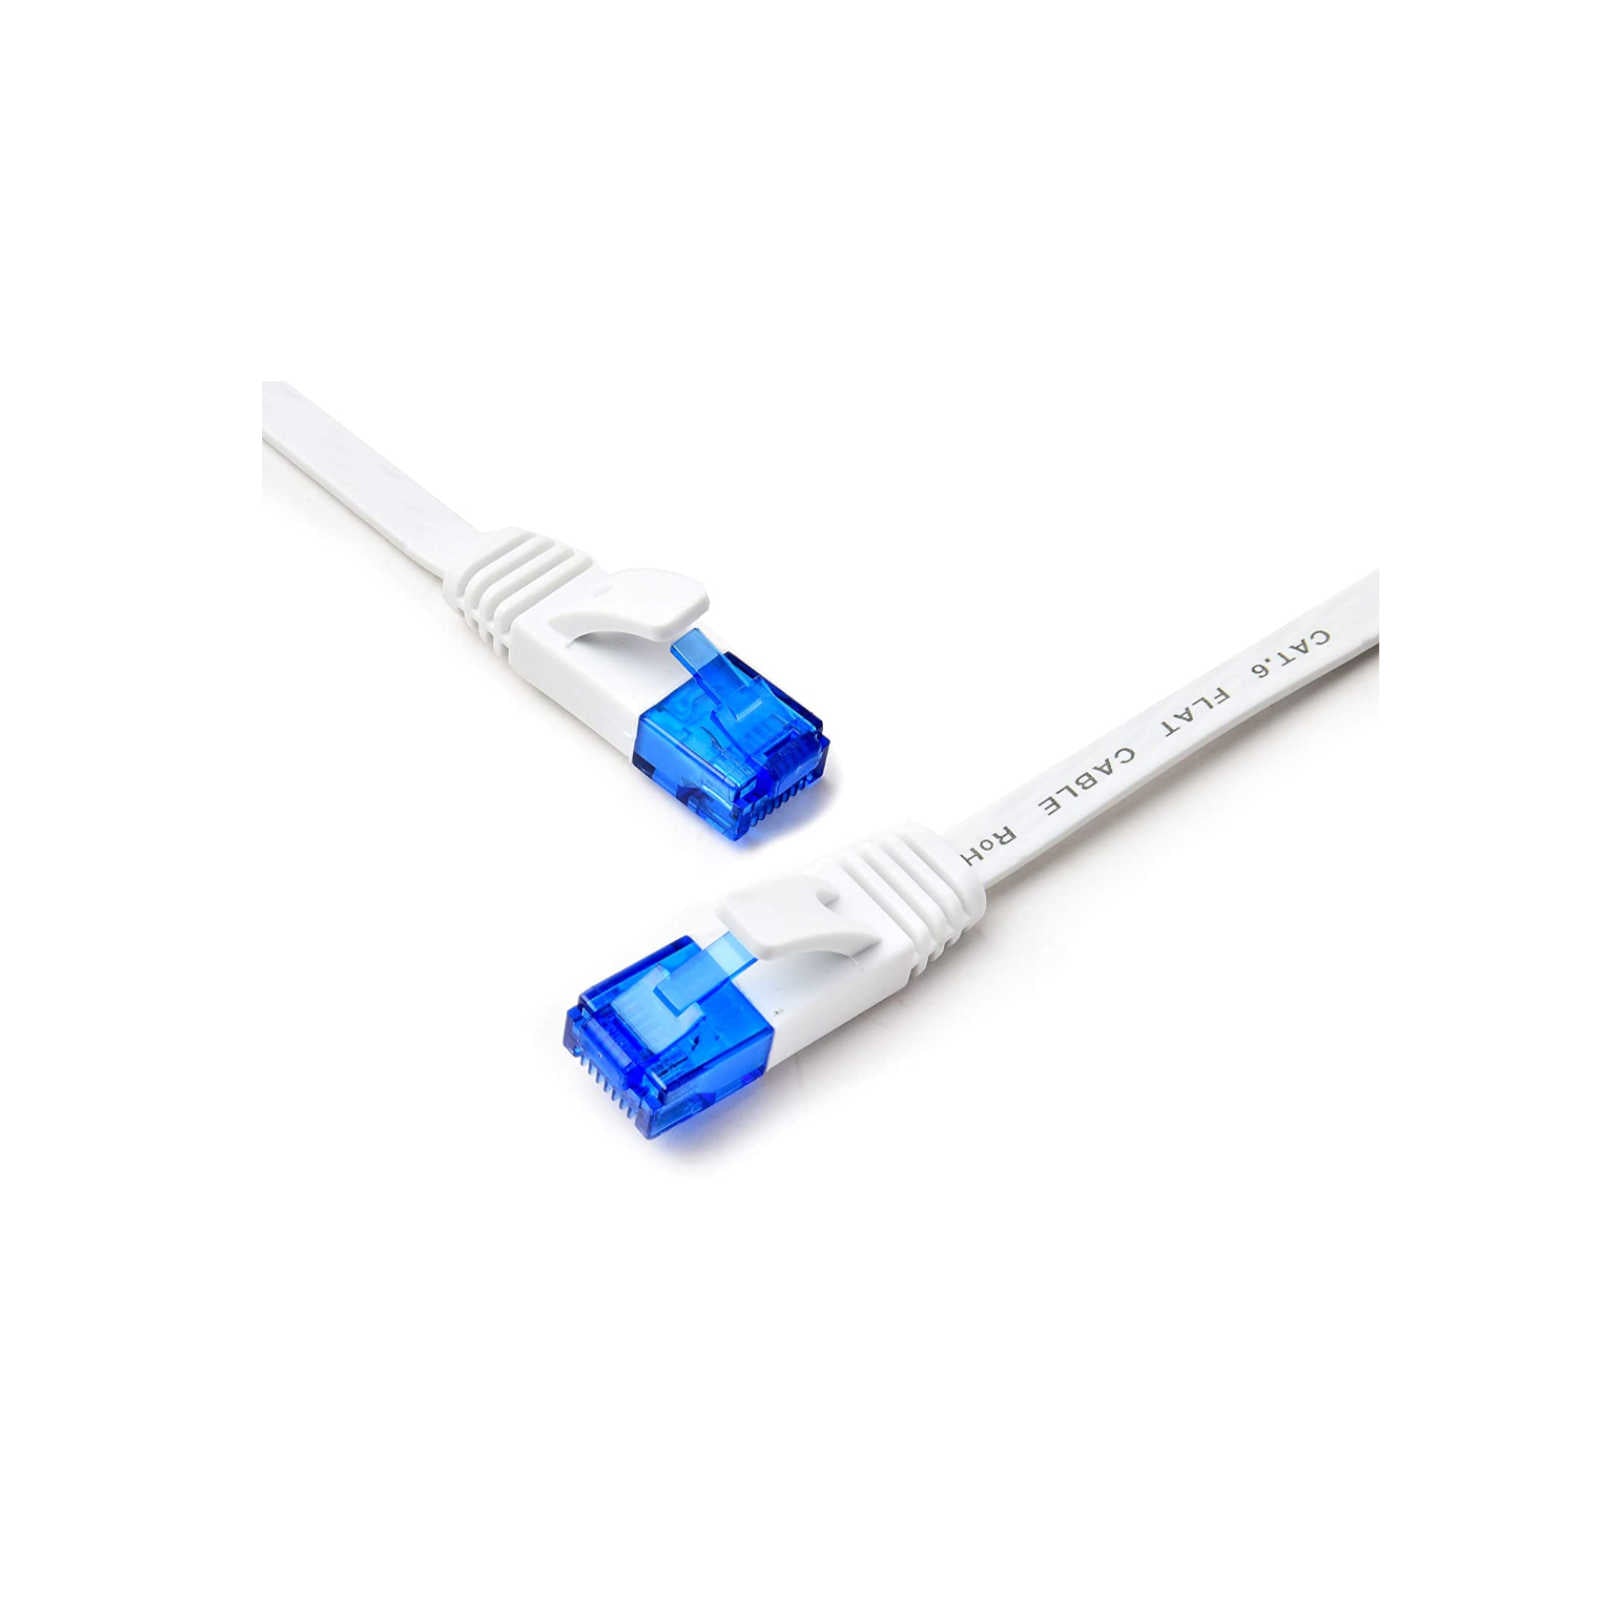 Buy BlueRigger Cat Ethernet Cable Flat Internet Network LAN Patch Cords –  Solid Cat6 High Speed Computer Wire/Cable. at Best Price in India